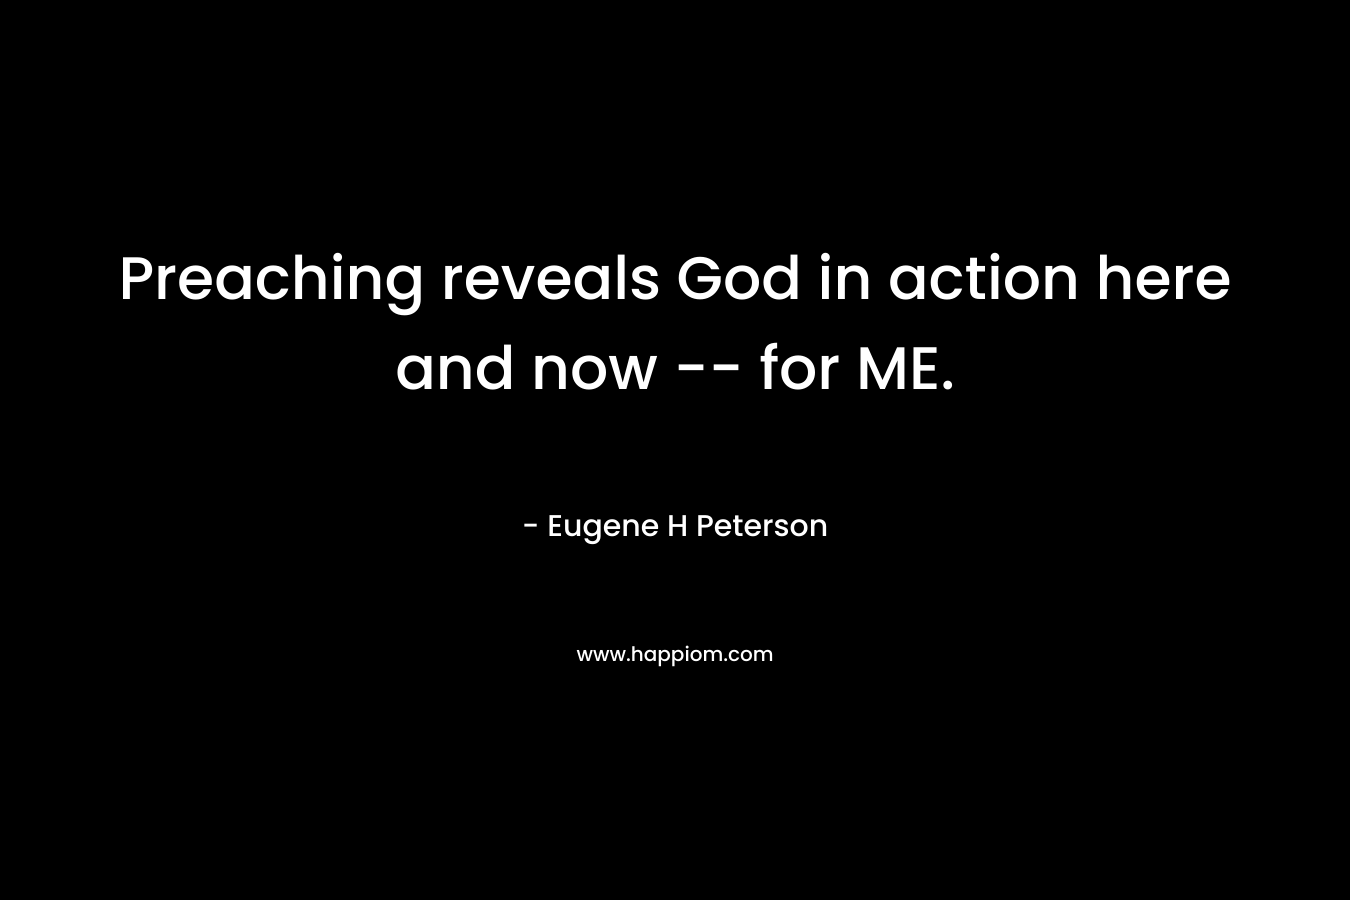 Preaching reveals God in action here and now — for ME. – Eugene H Peterson